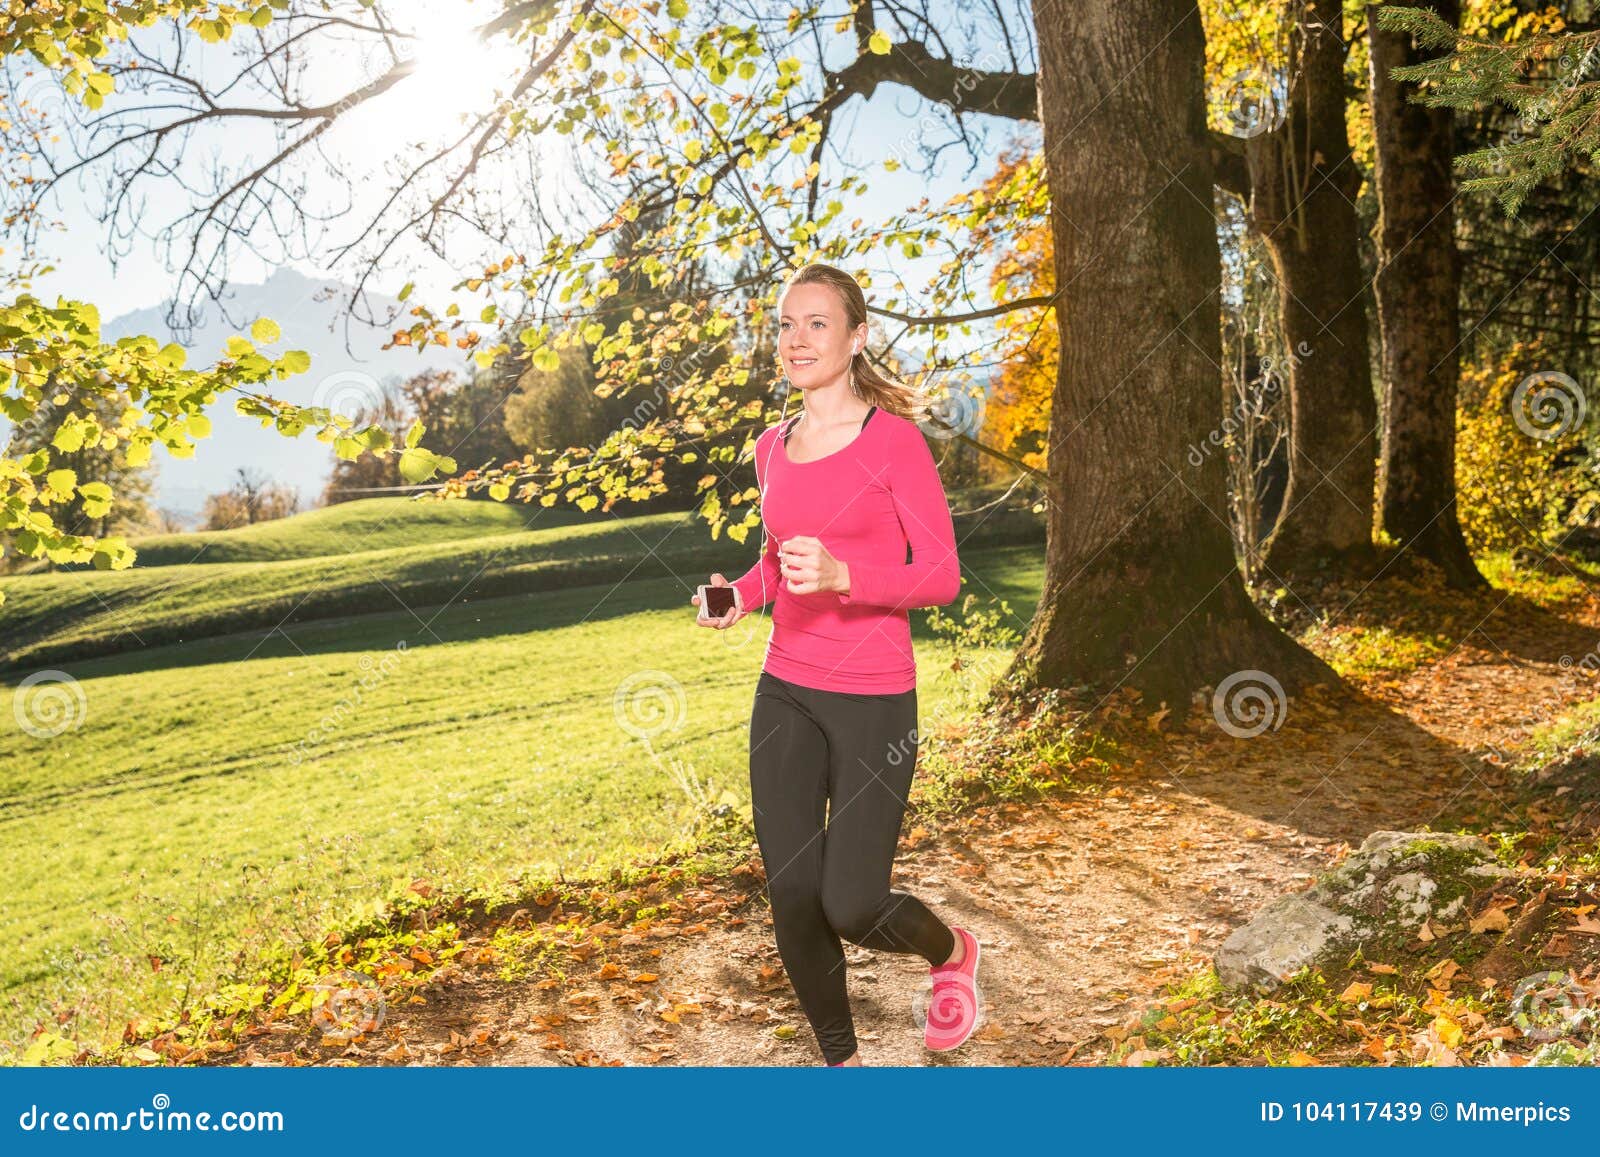 Running through the Autumn Forest Stock Image - Image of finished ...